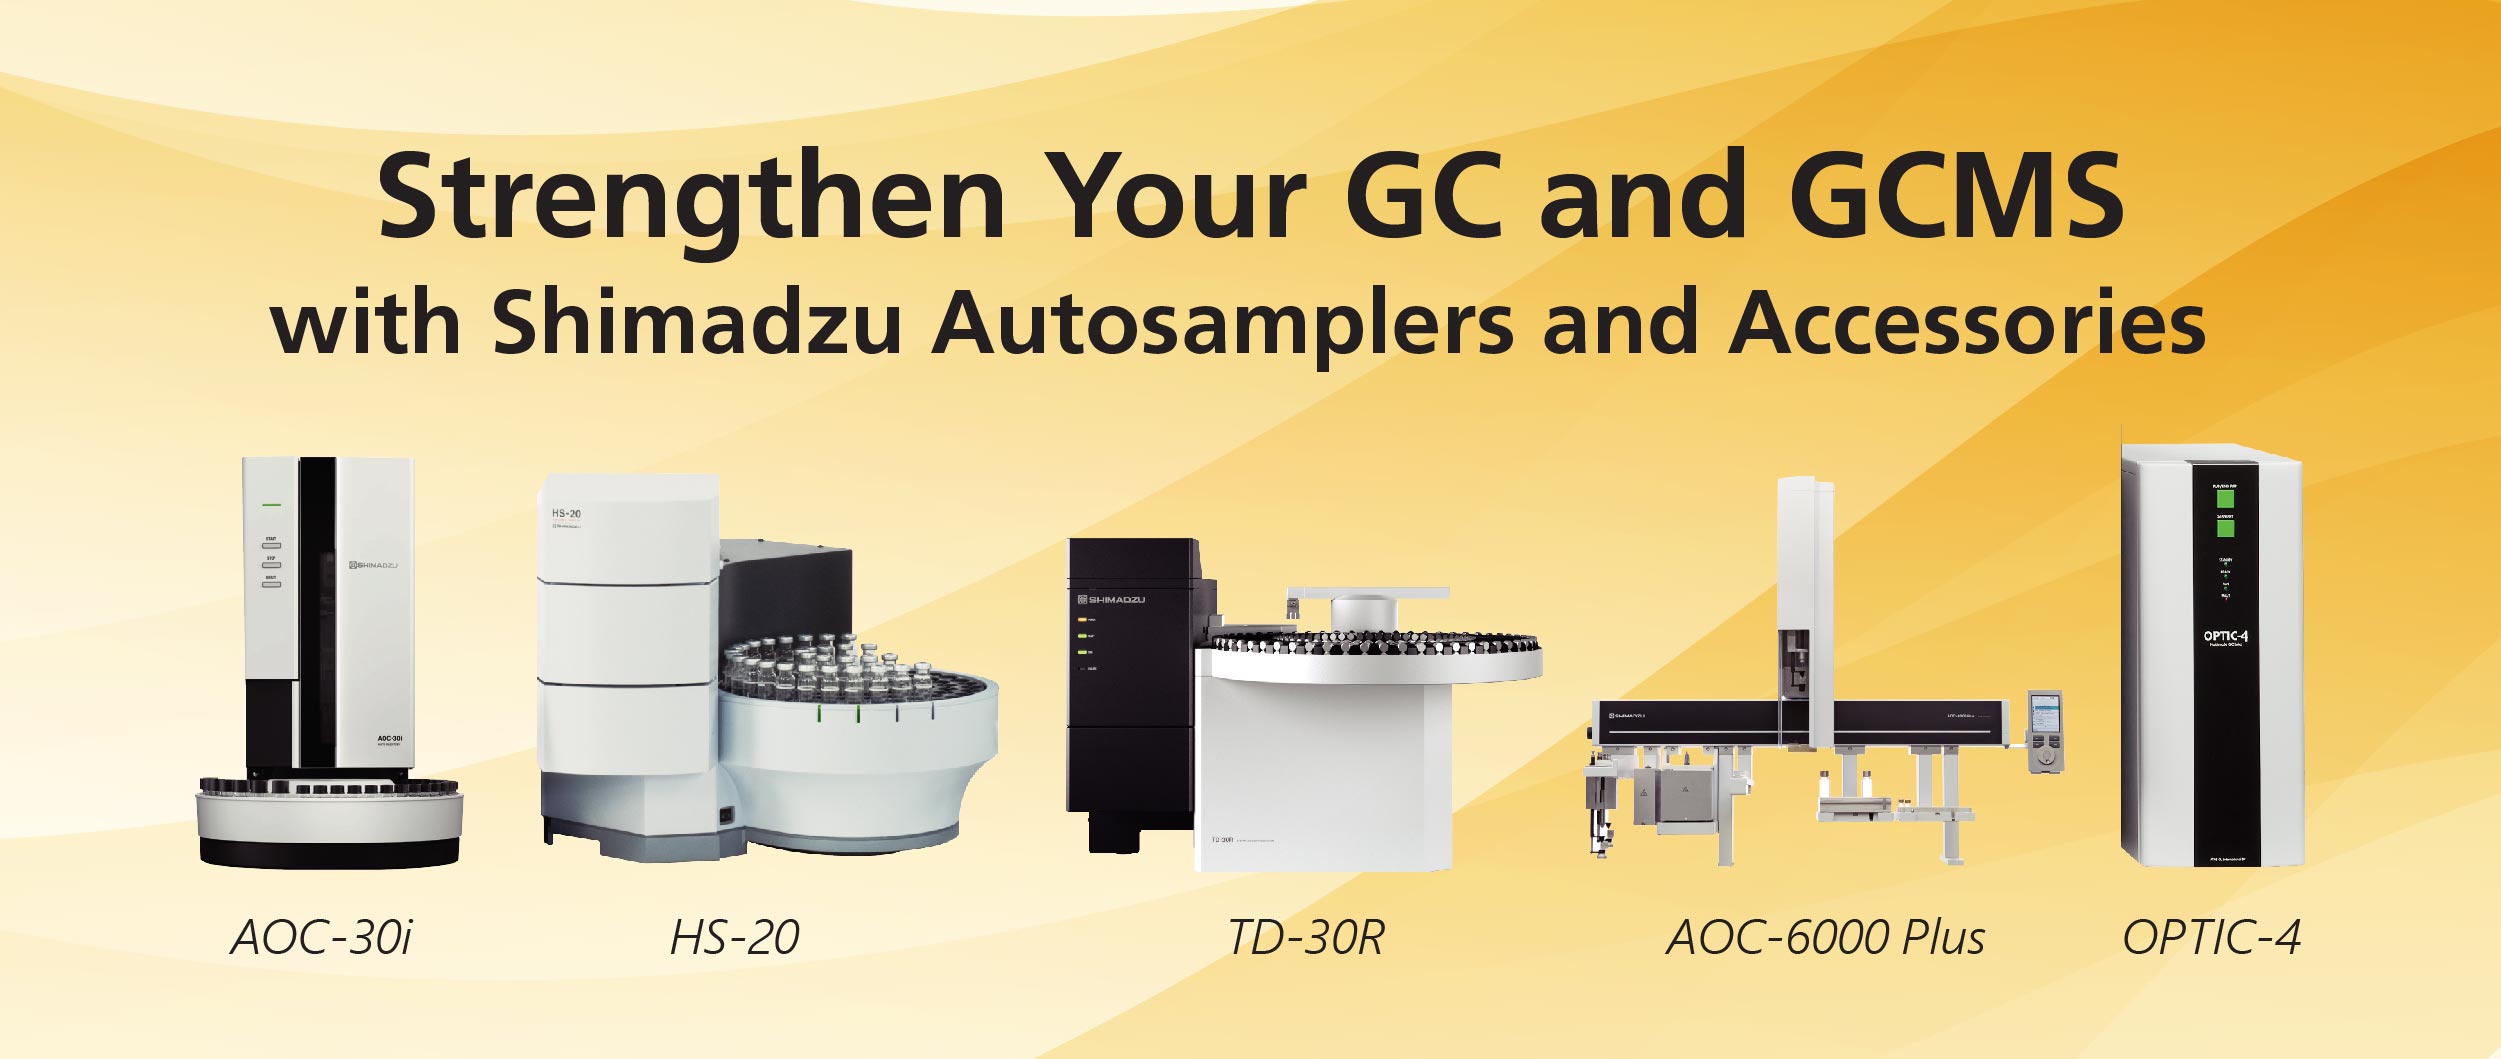 Strengthen Your GC and GCMS with Shimadzu Autosamplers and Accessories